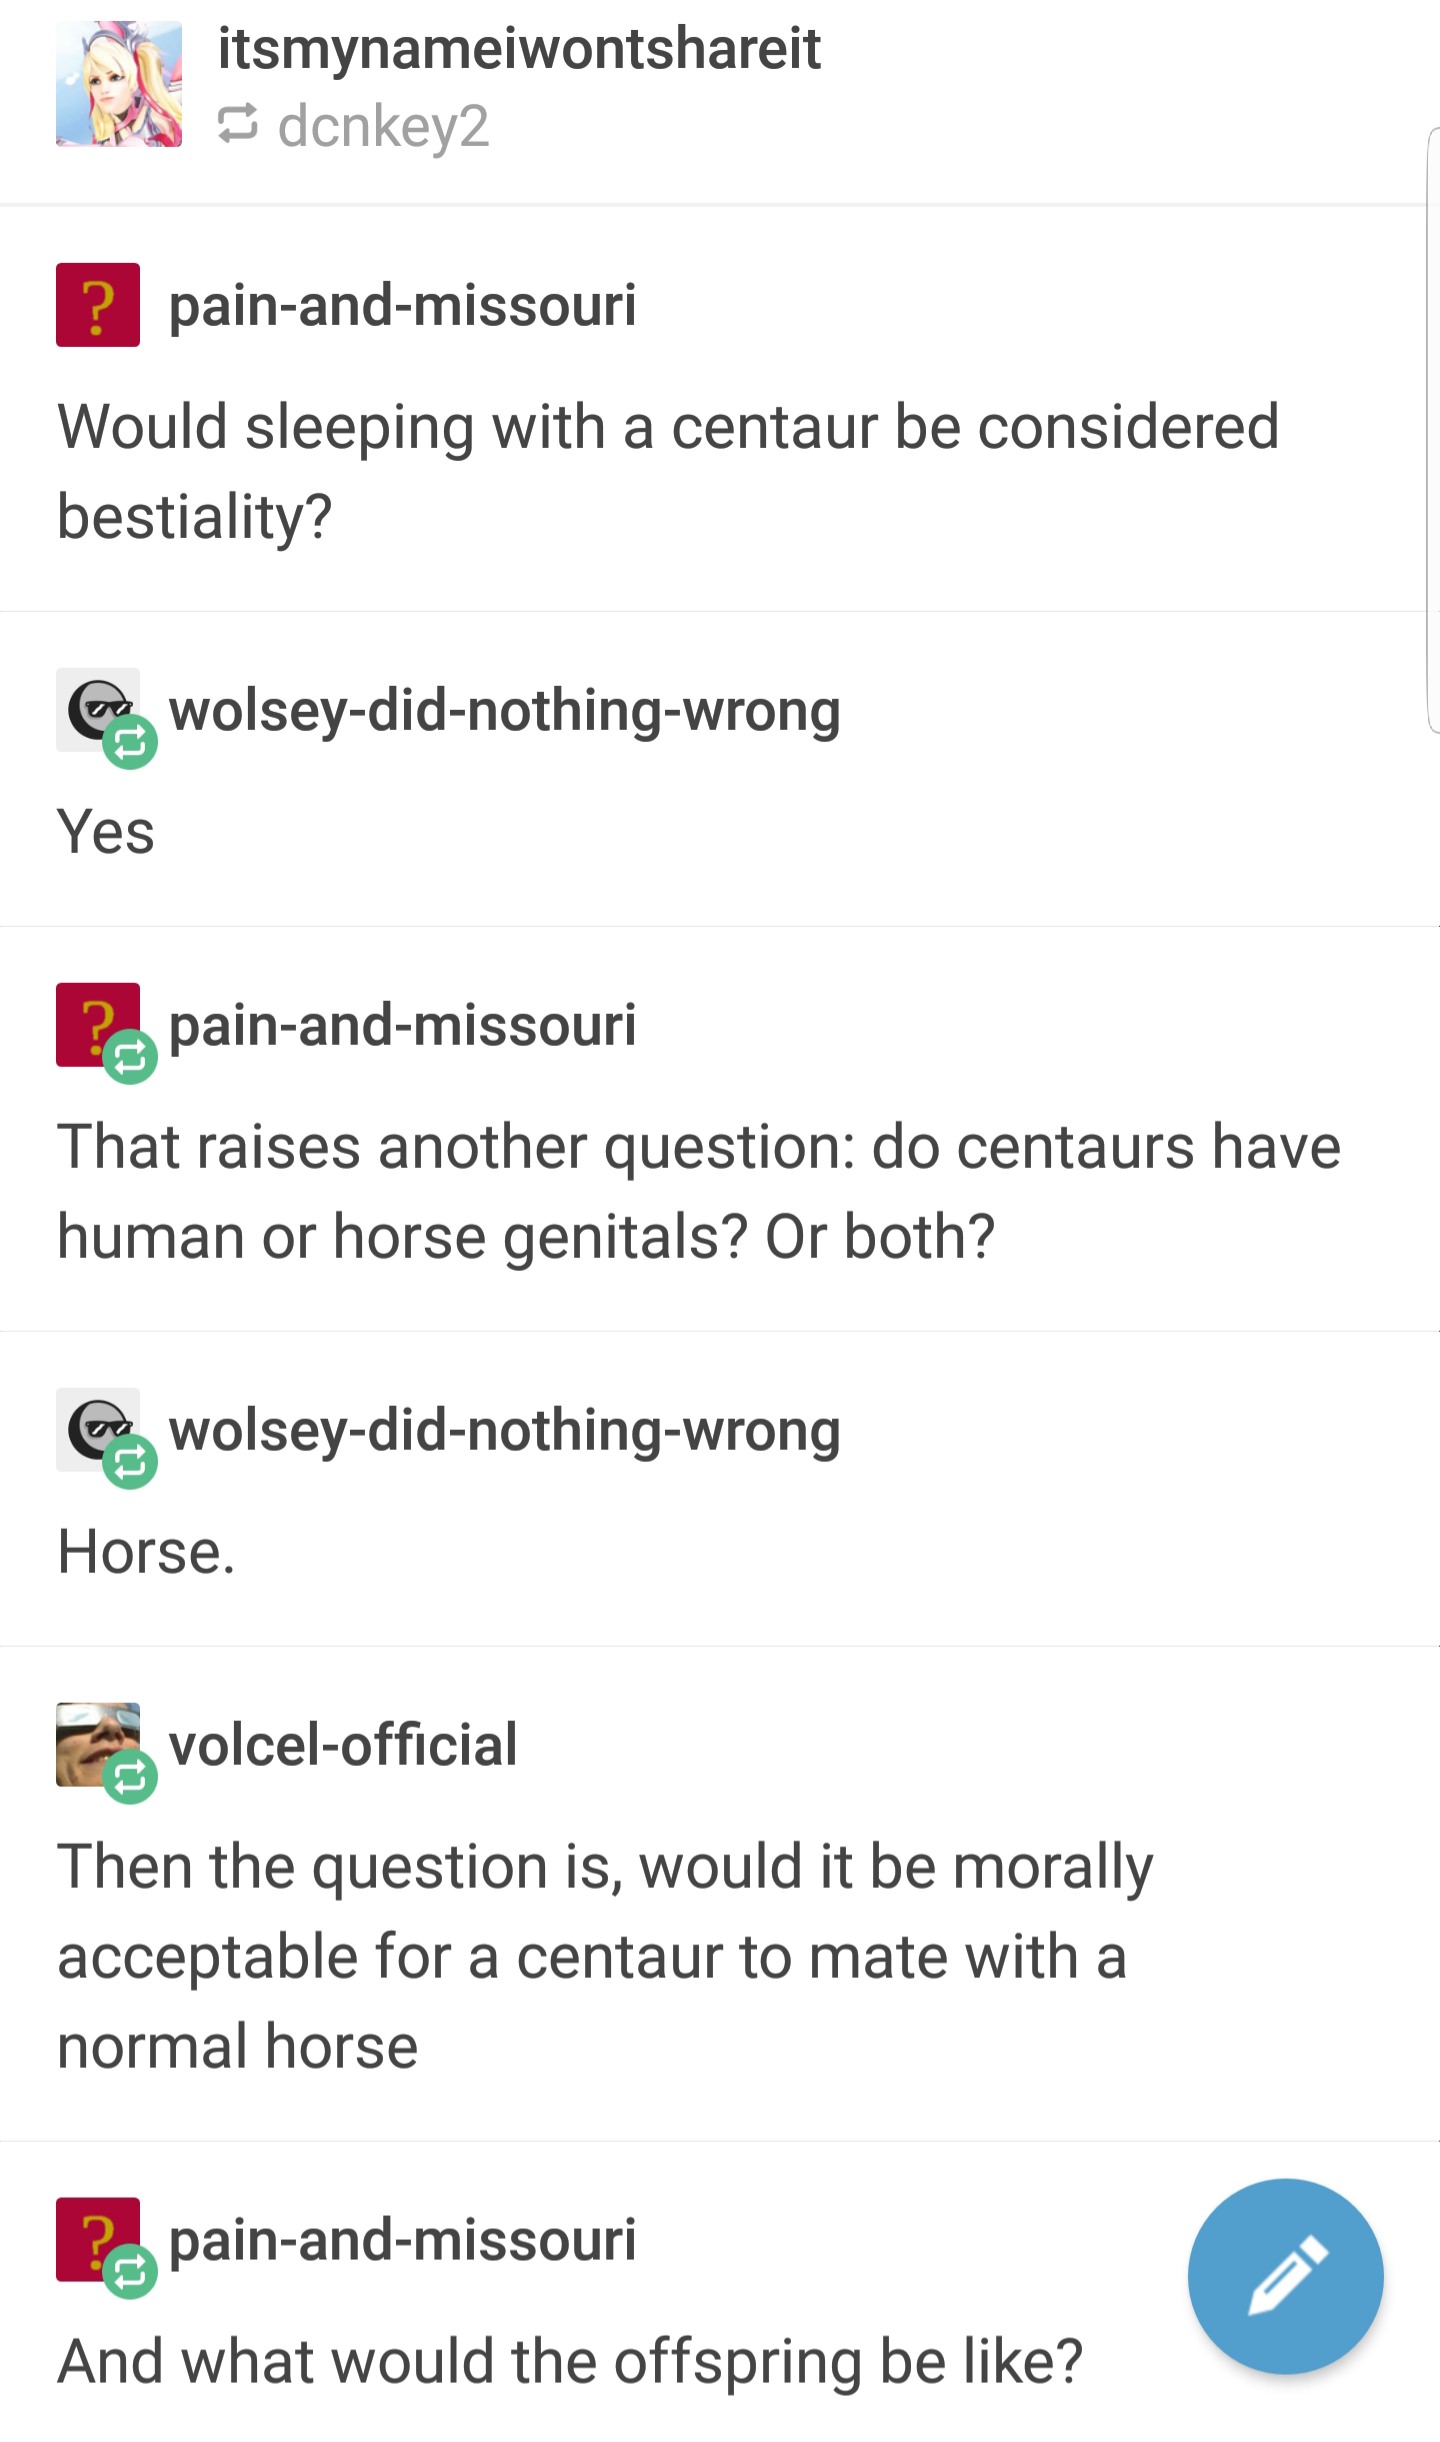 tumblr - document - itsmynameiwontit dcnkey2 ? painandmissouri Would sleeping with a centaur be considered bestiality? be wolseydidnothingwrong Yes ?. painandmissouri That raises another question do centaurs have human or horse genitals? Or both? Cowolsey